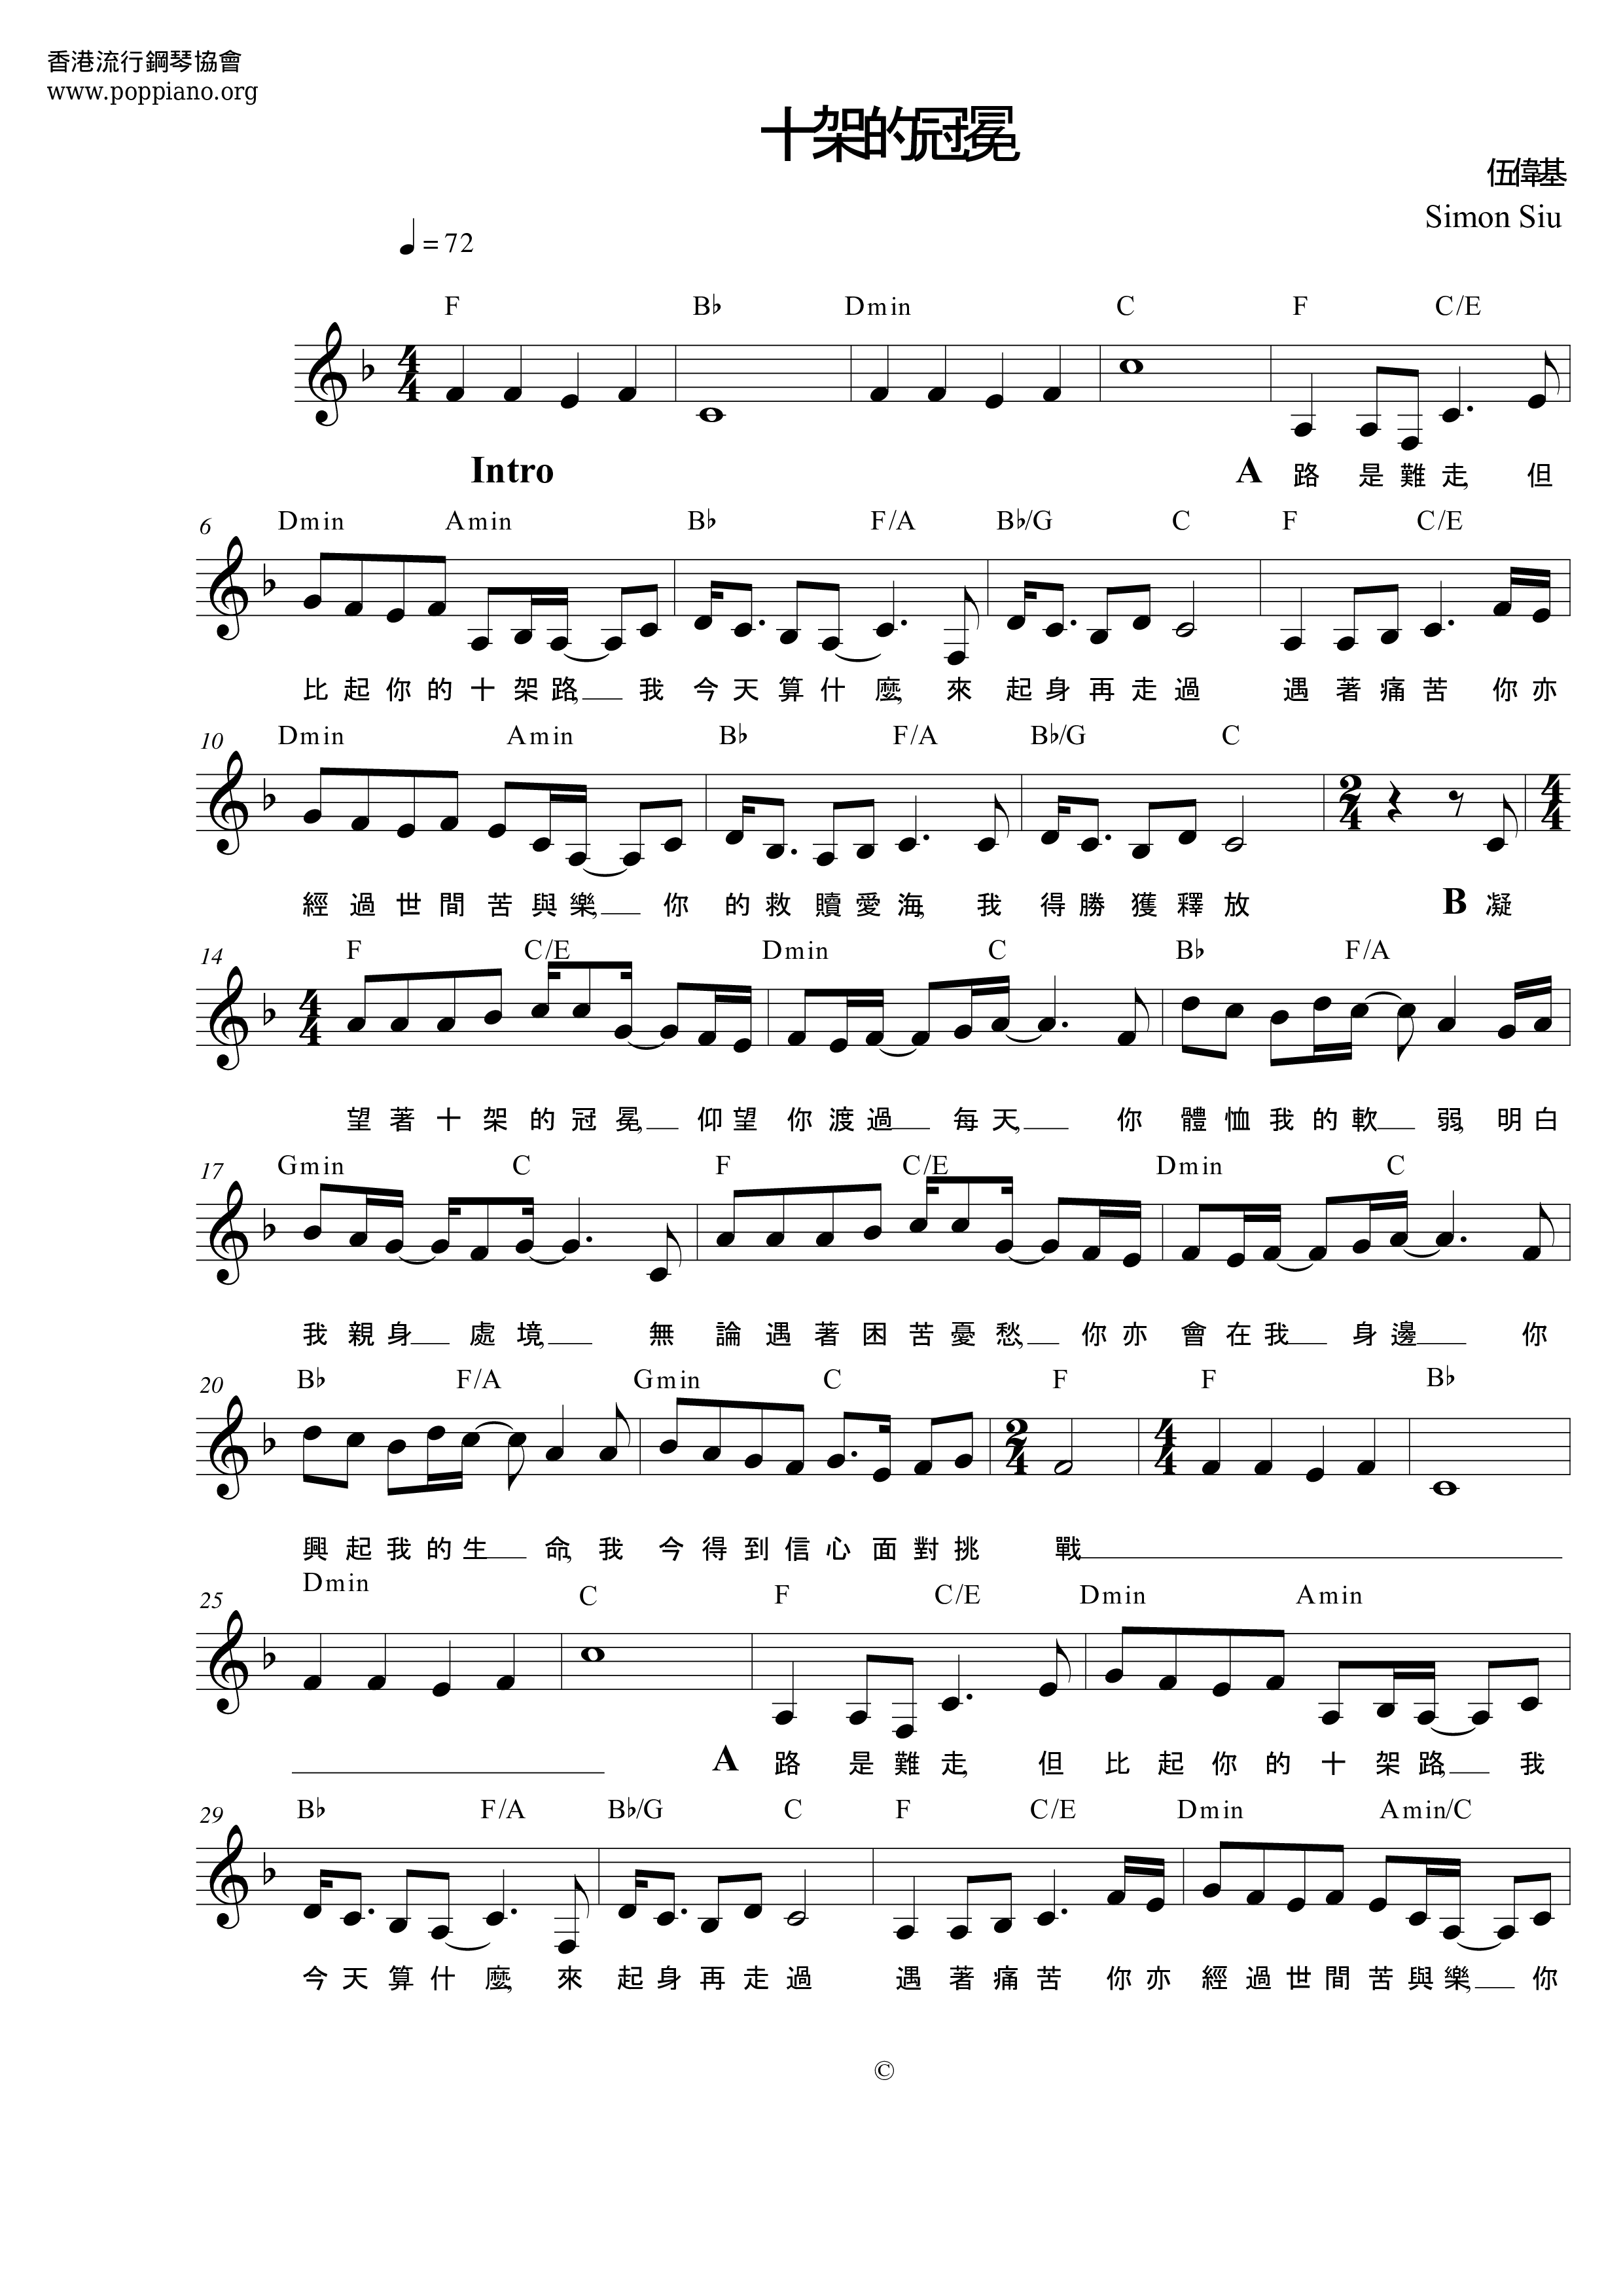 The Crown Of The Cross Score